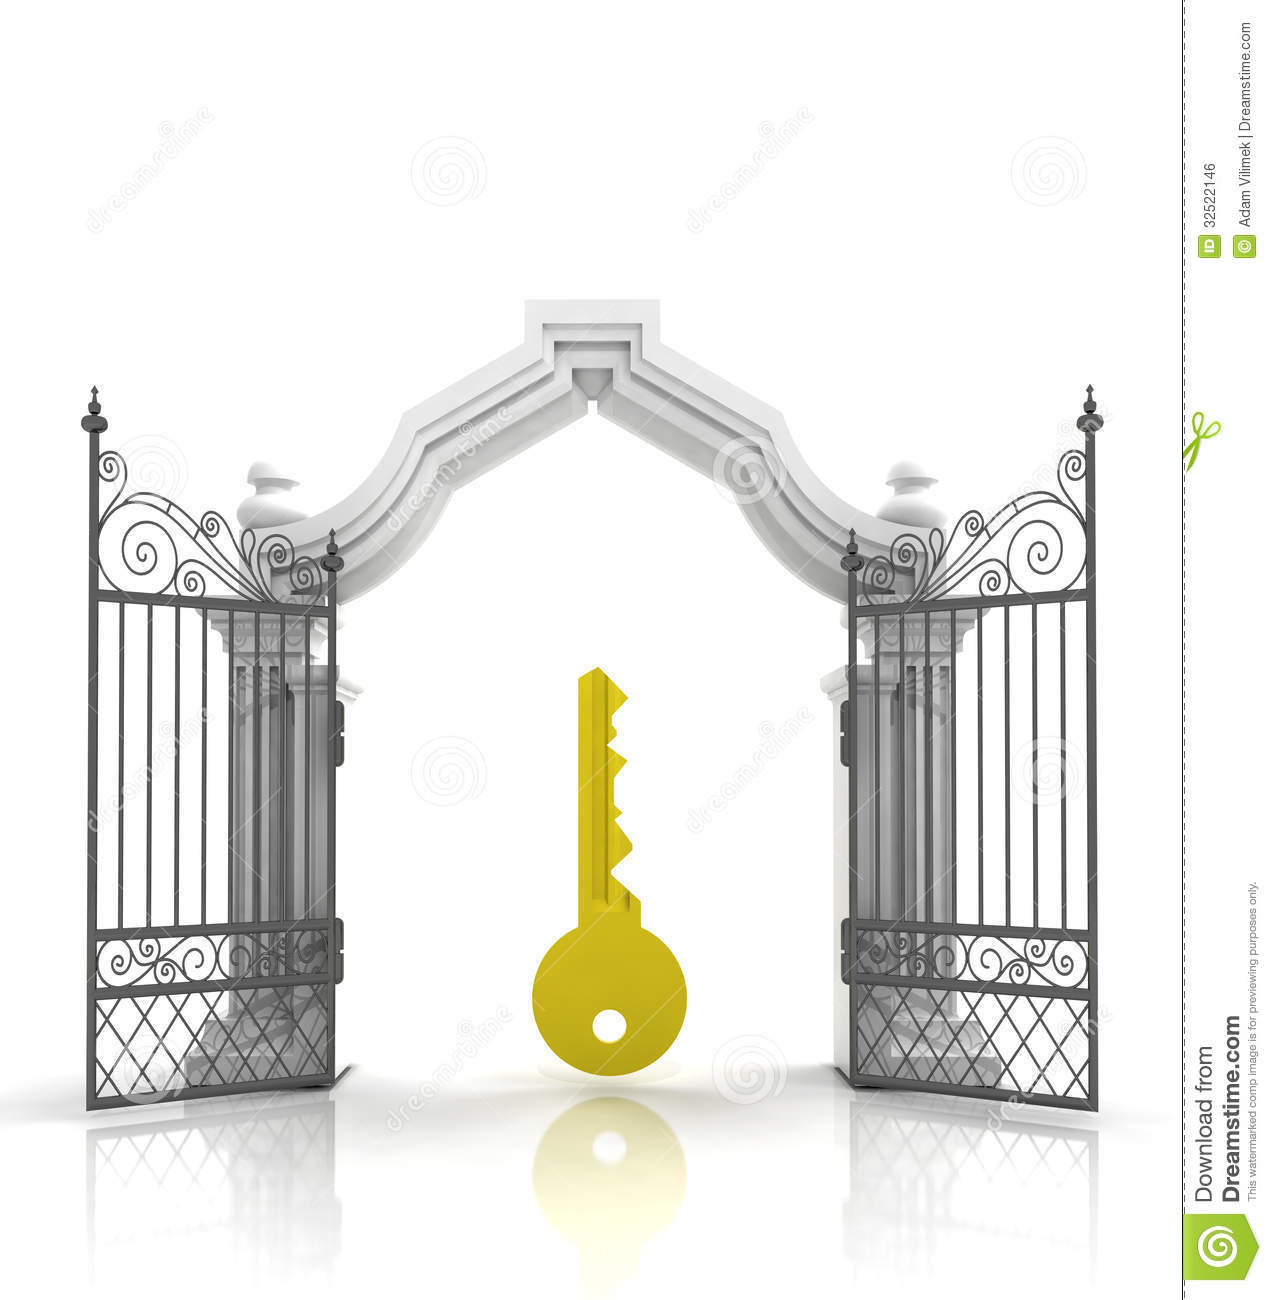 Open Baroque Gate With Golden Key Royalty Free Stock Image   Image